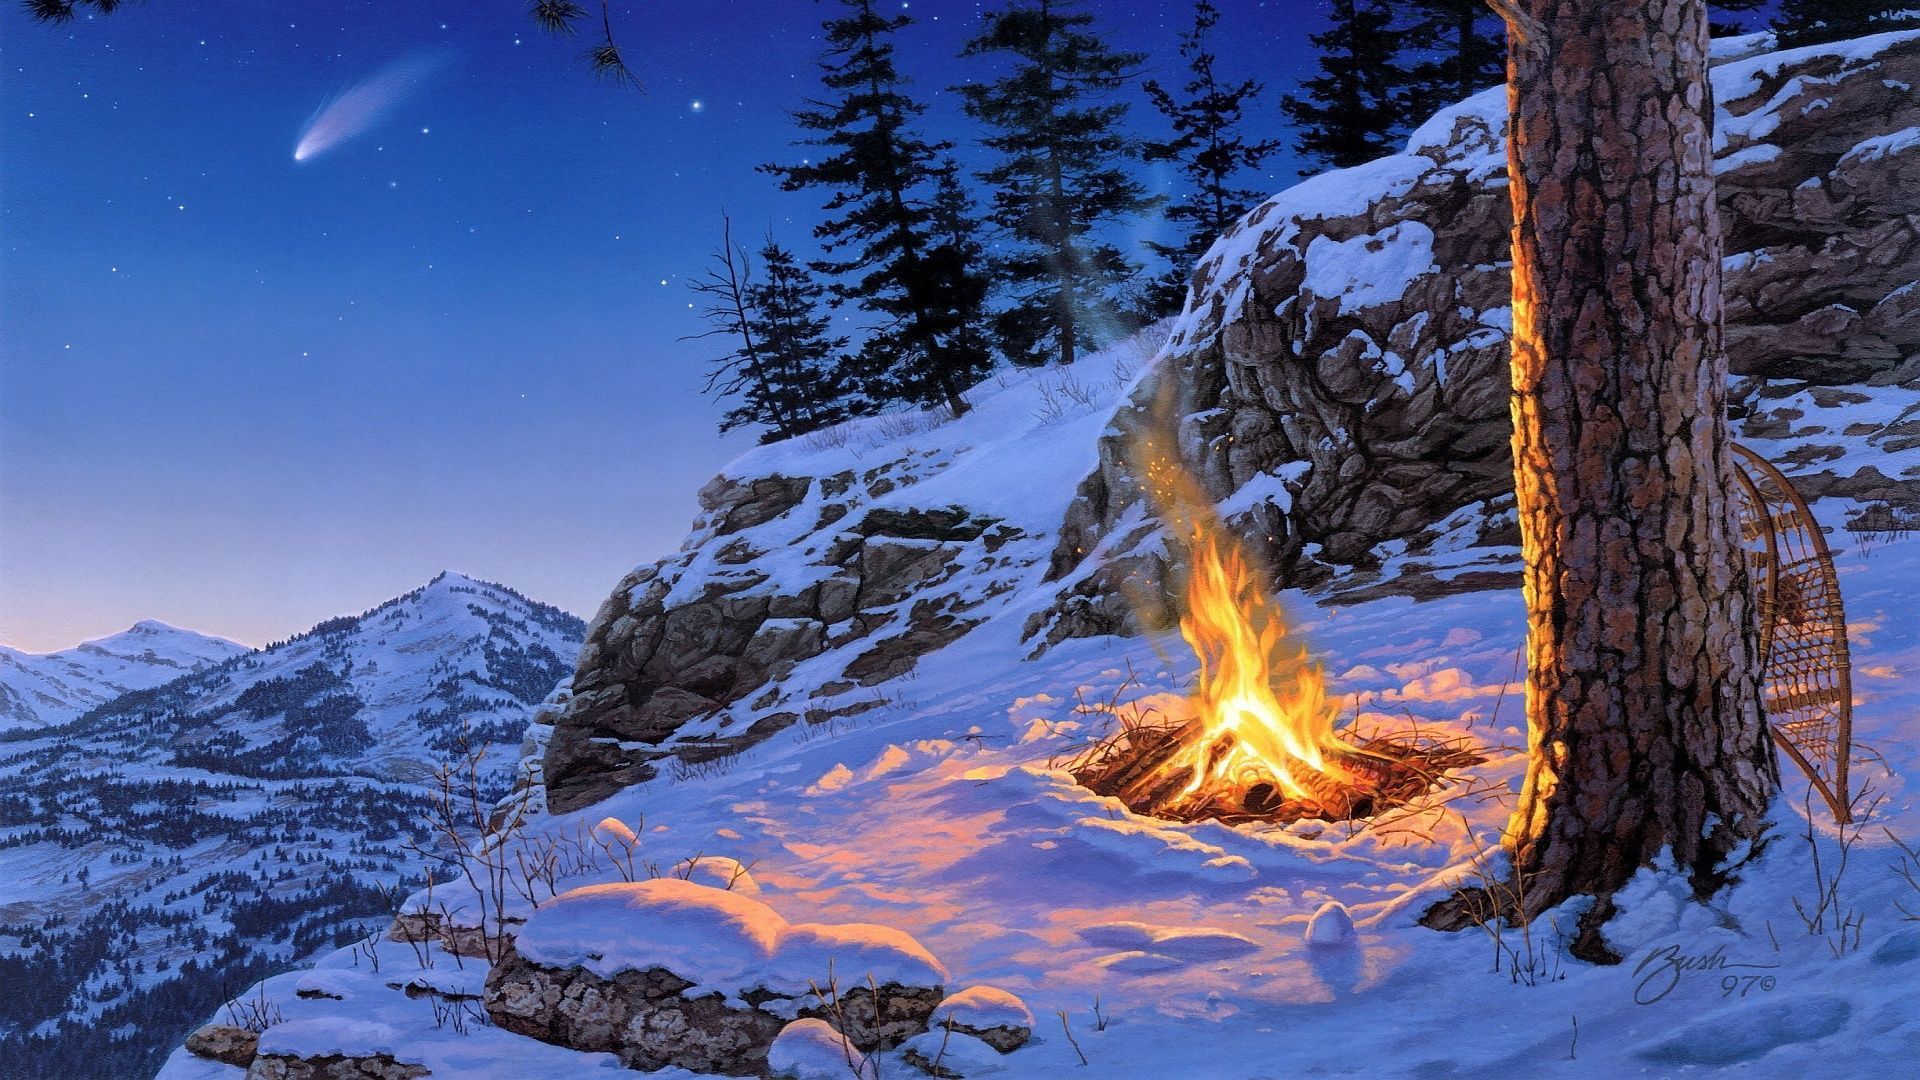 Fire on the snowy mountain wallpaper. Landscape paintings, Winter wallpaper, Winter picture